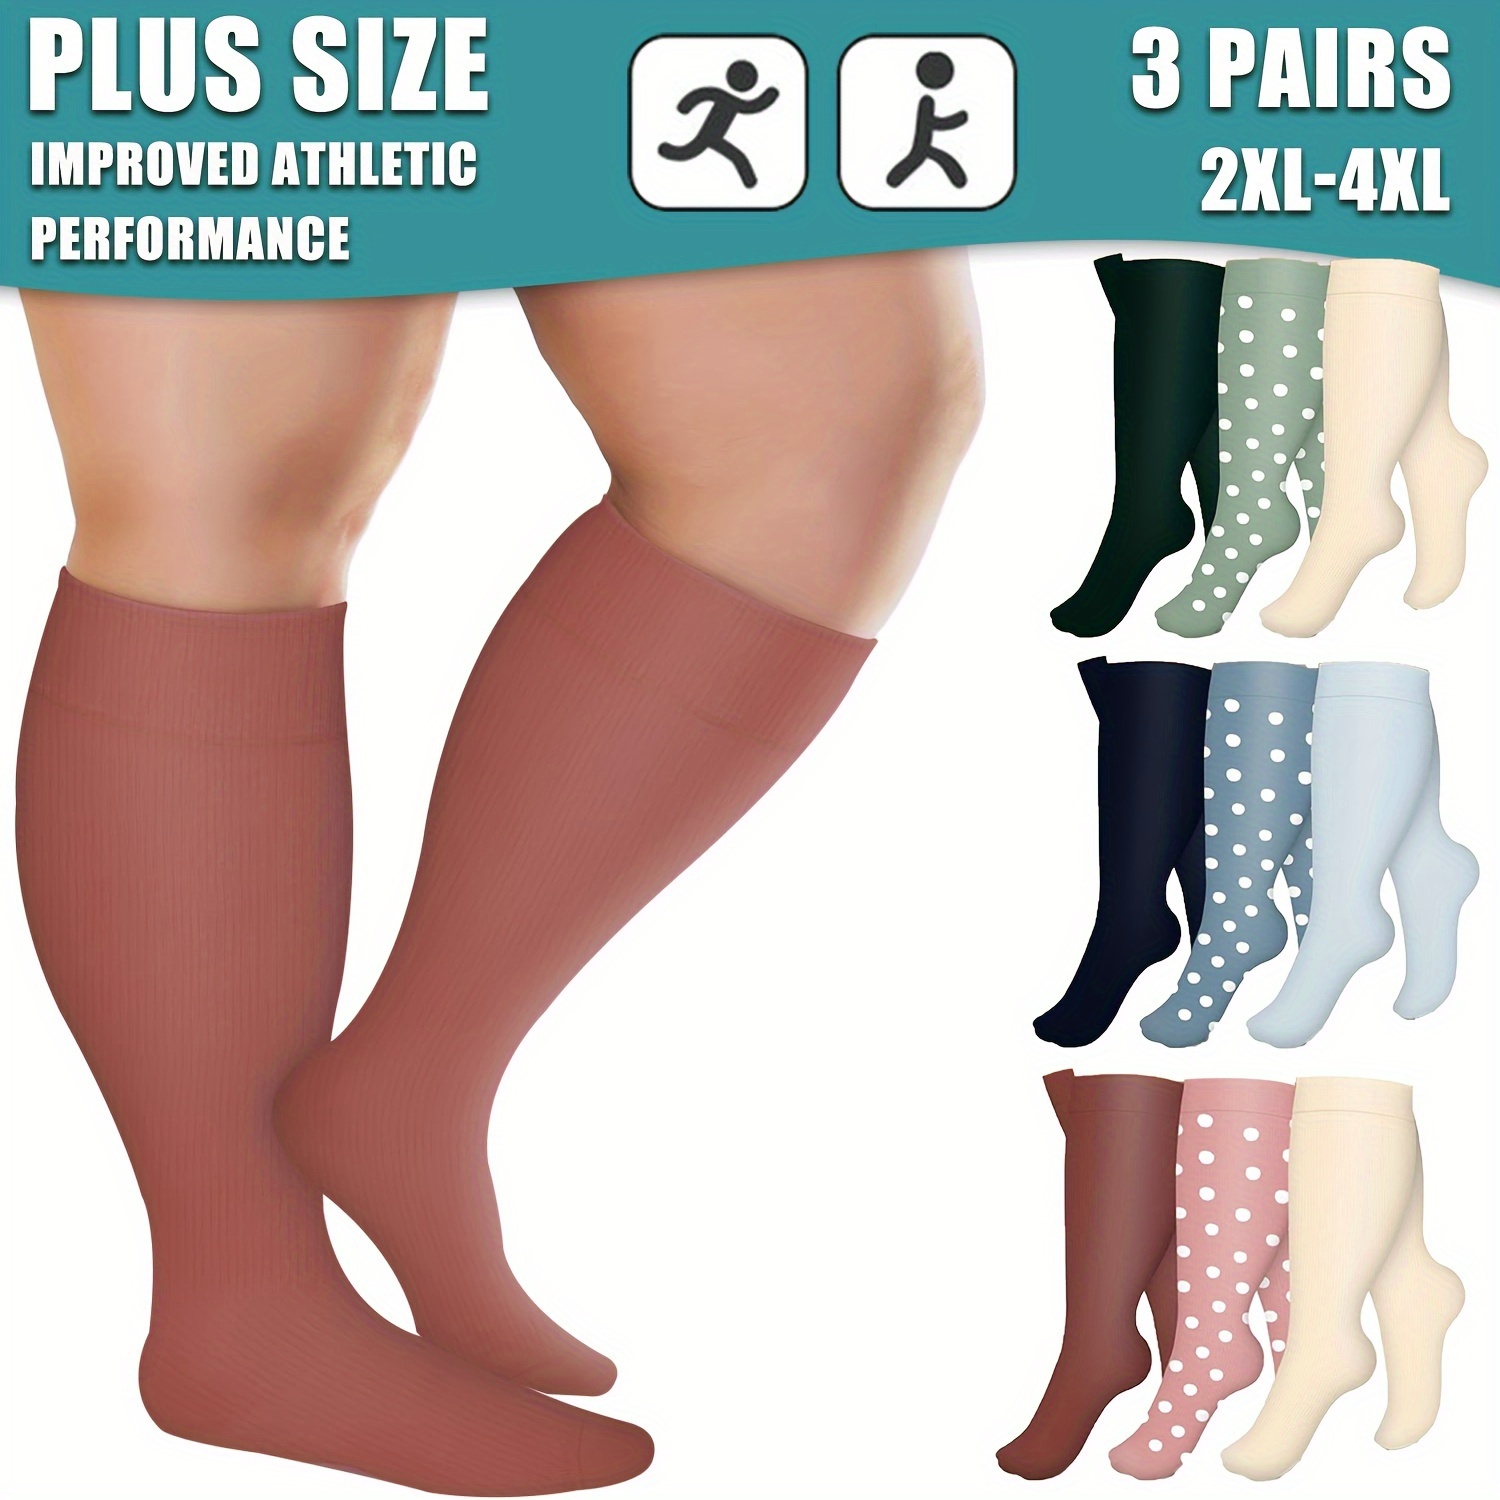 Diu Life 3 Pairs Plus Size Compression Socks for Women and Men